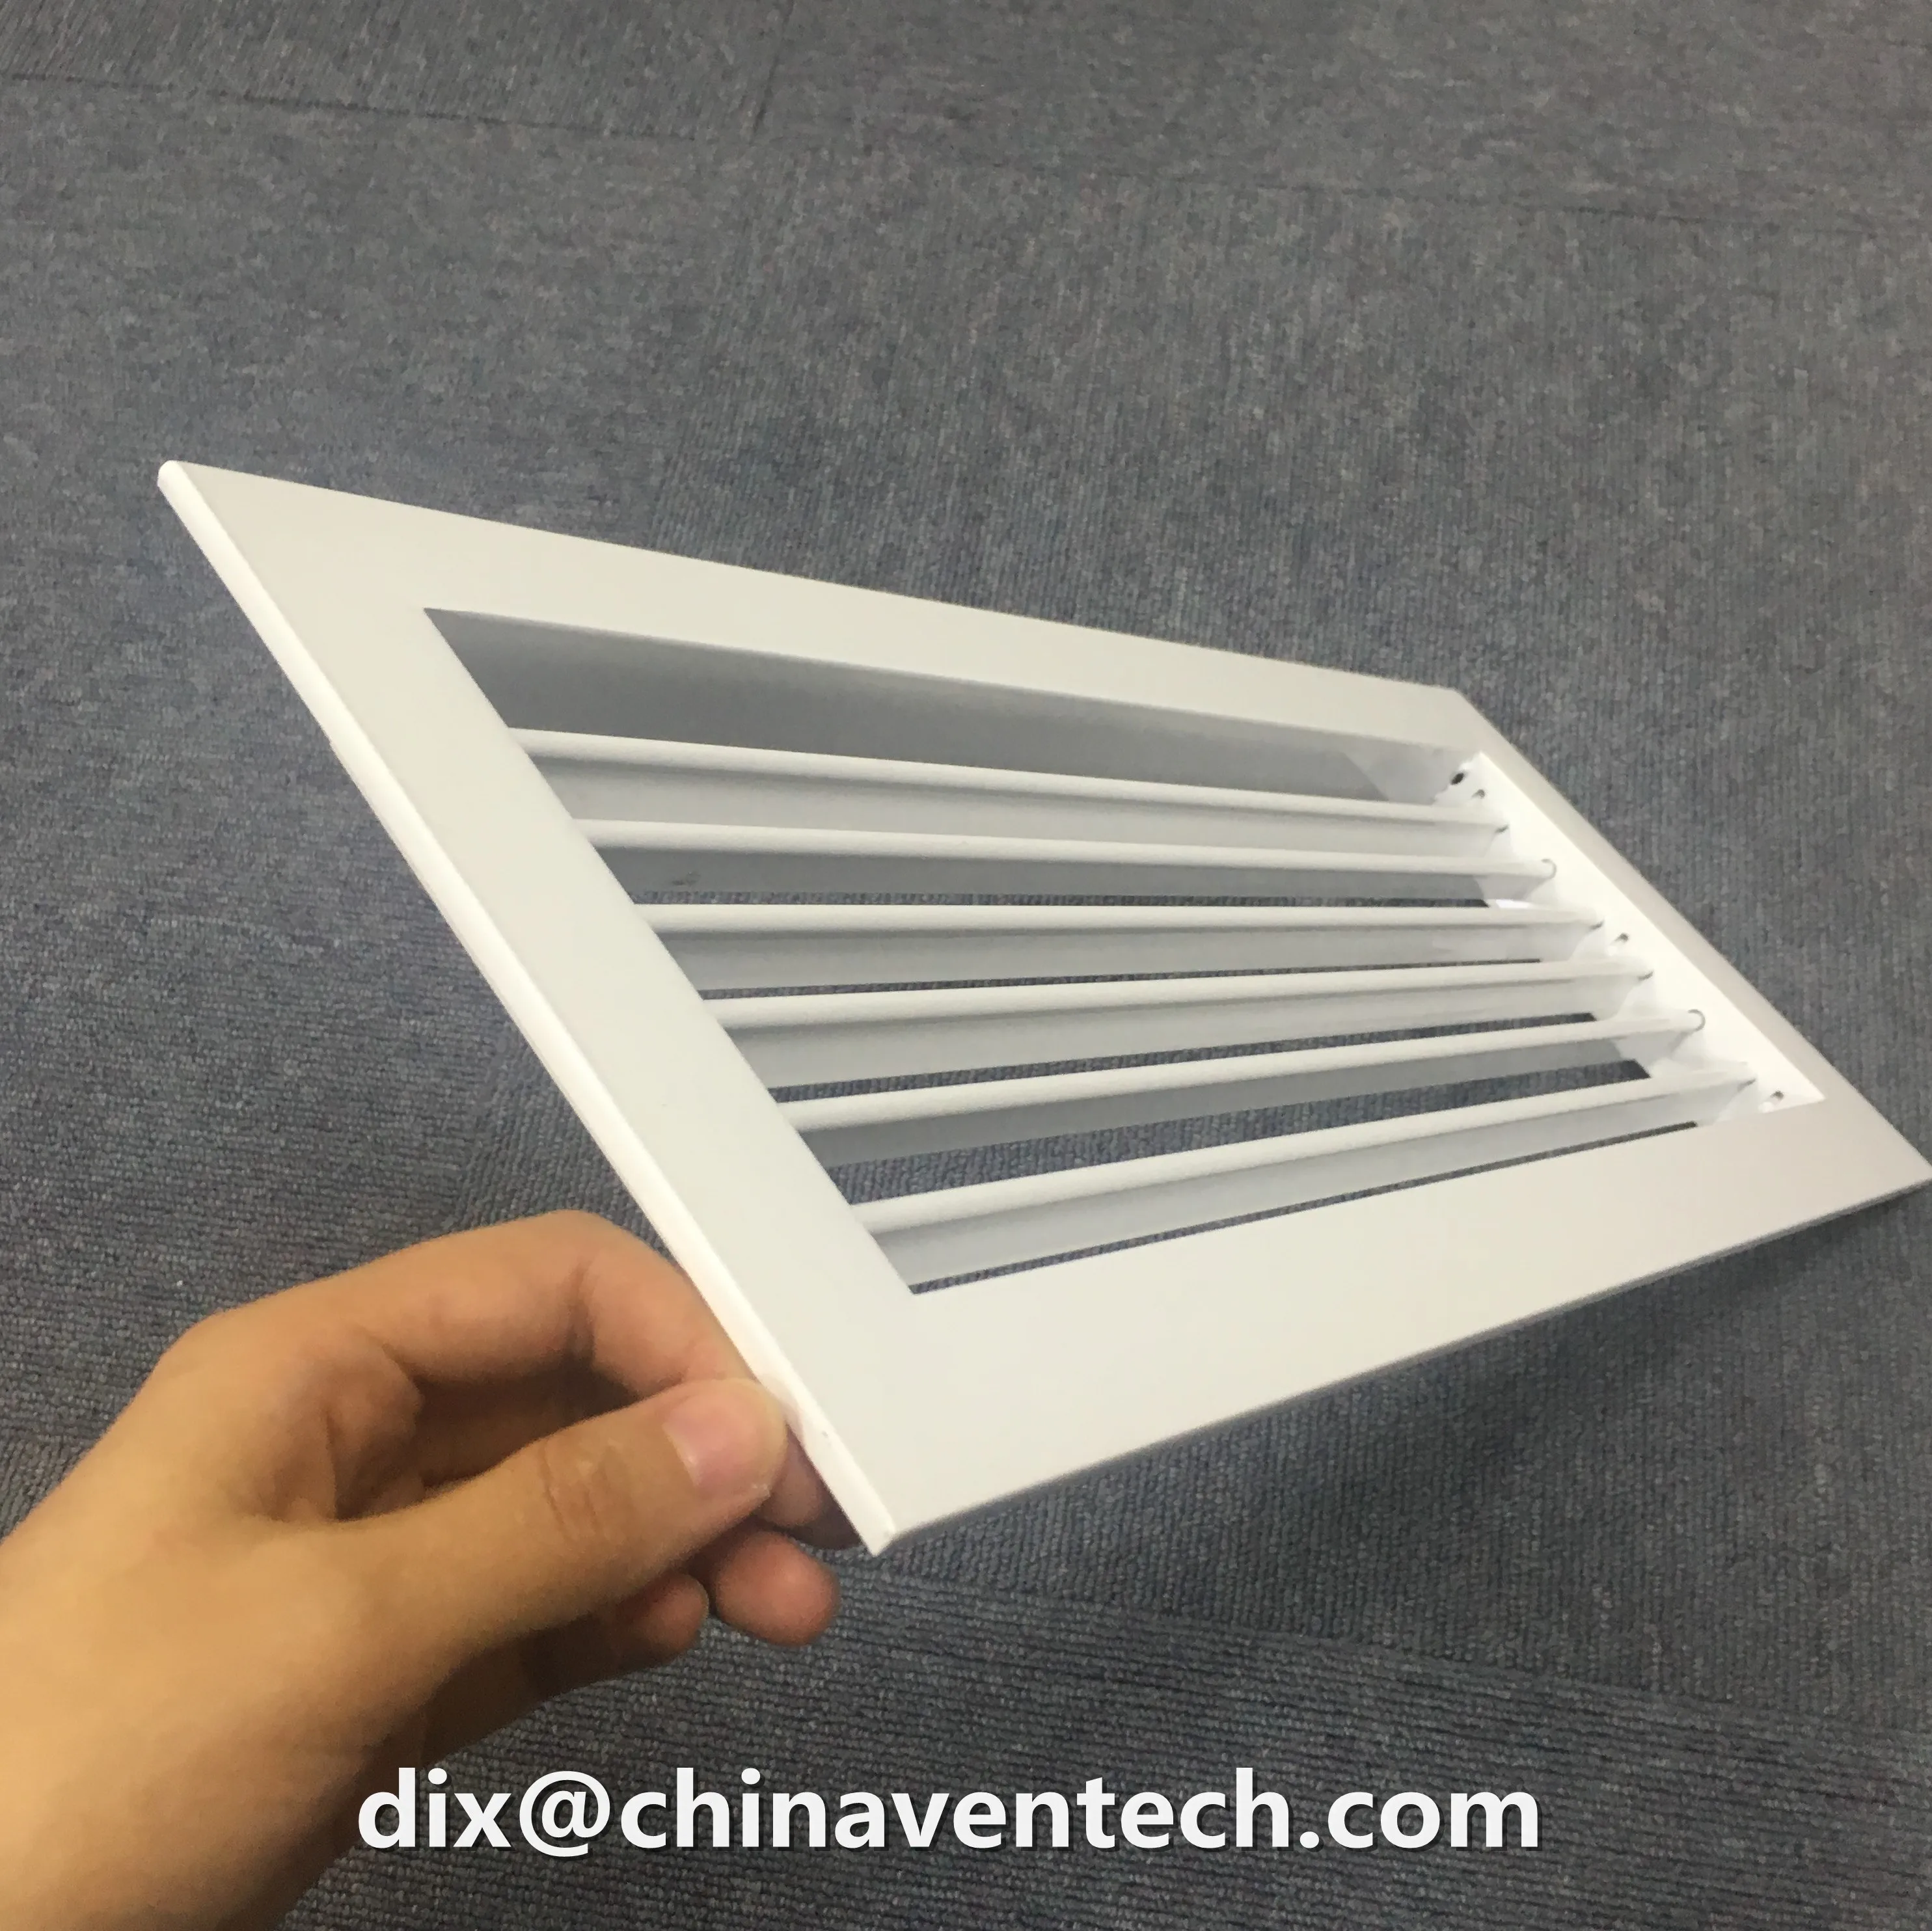 Ventech High Quality Air Conditioning Ceiling Air Register Single Deflection Grille